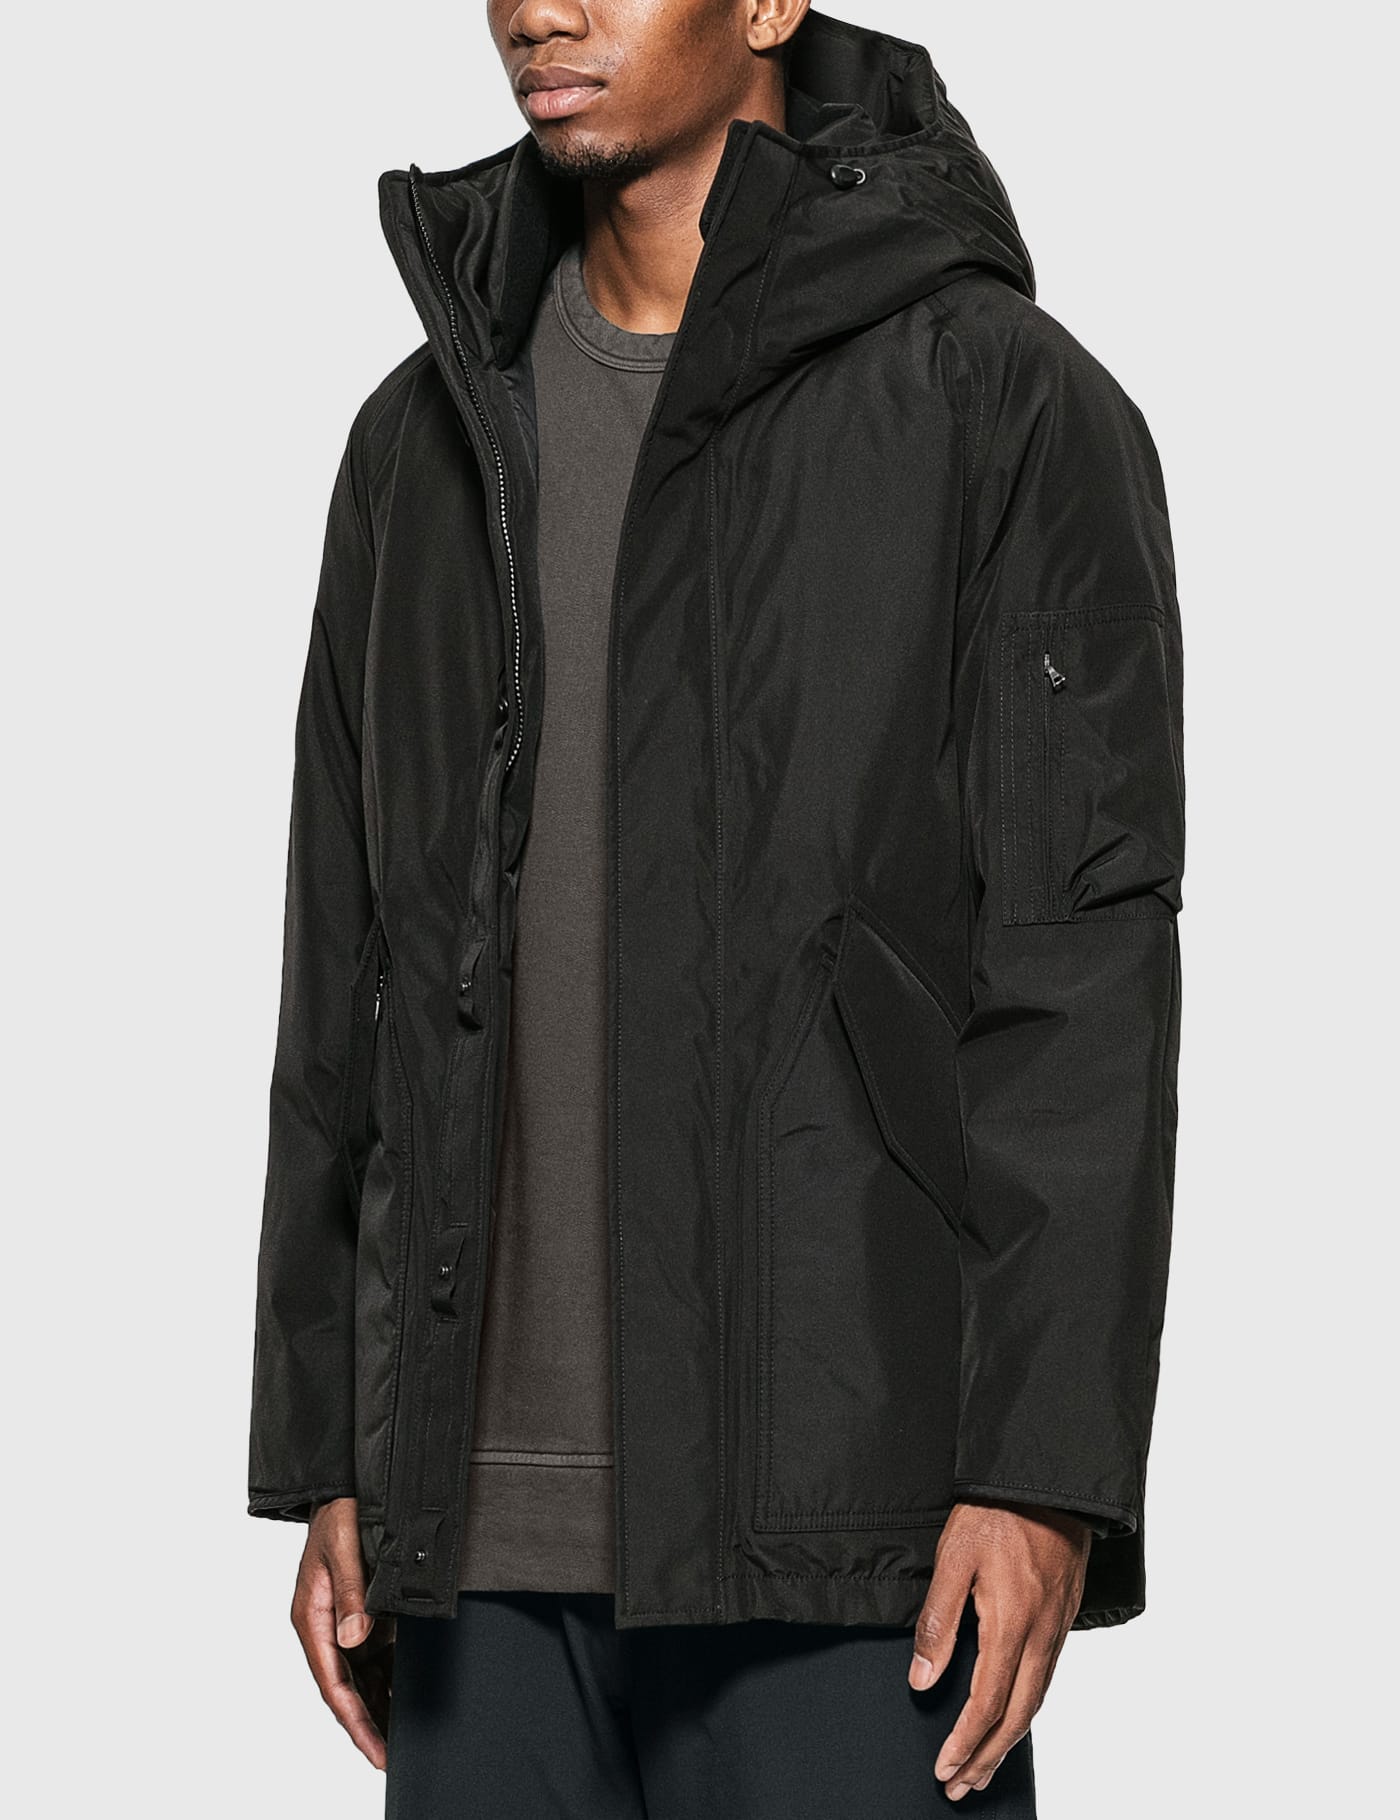 Nanamica - Gore-Tex Down Coat | HBX - Globally Curated Fashion and